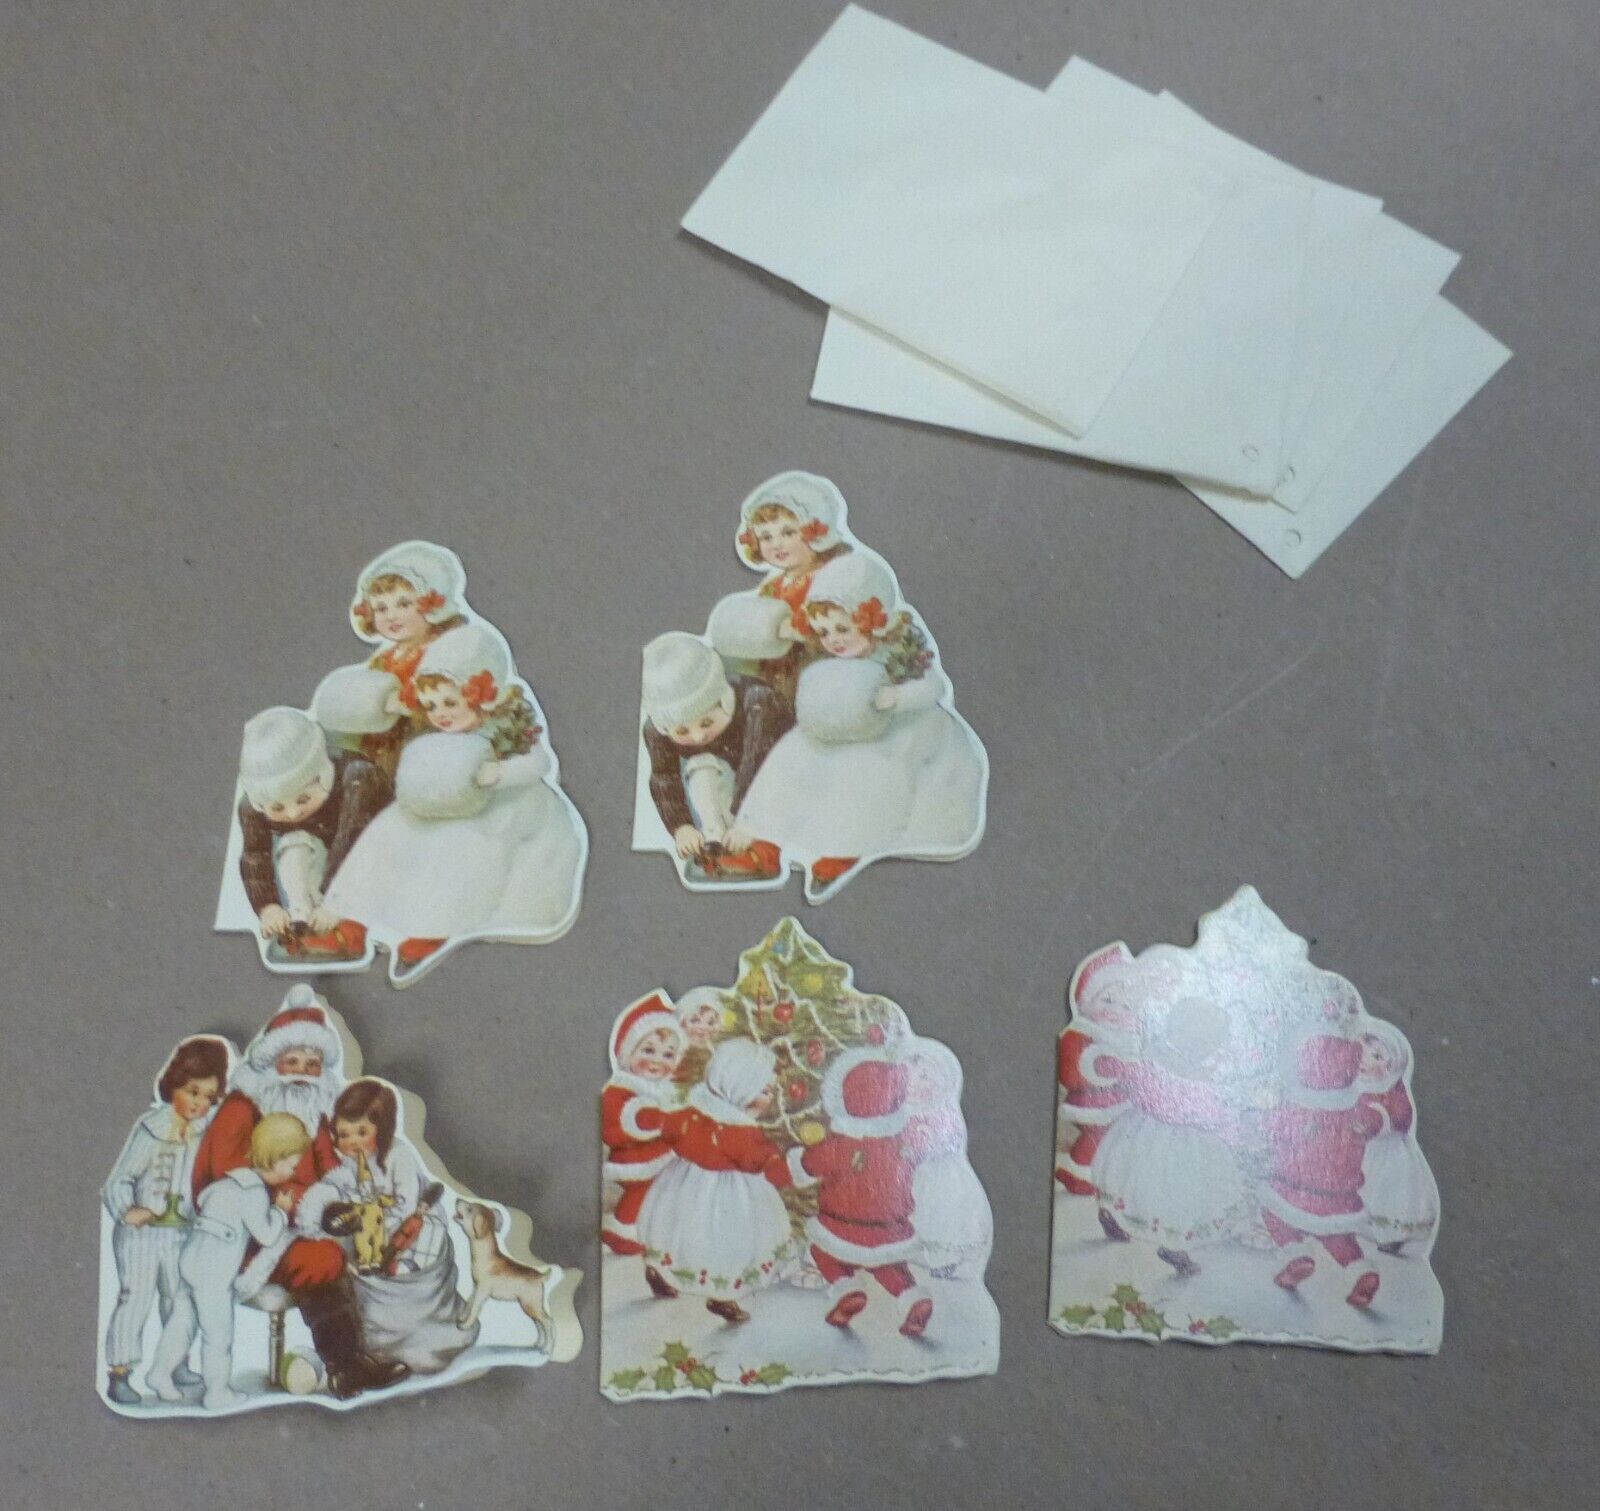 Lot of 5 Small Vintage Folded Christmas Gift Tags with Envelopes - New